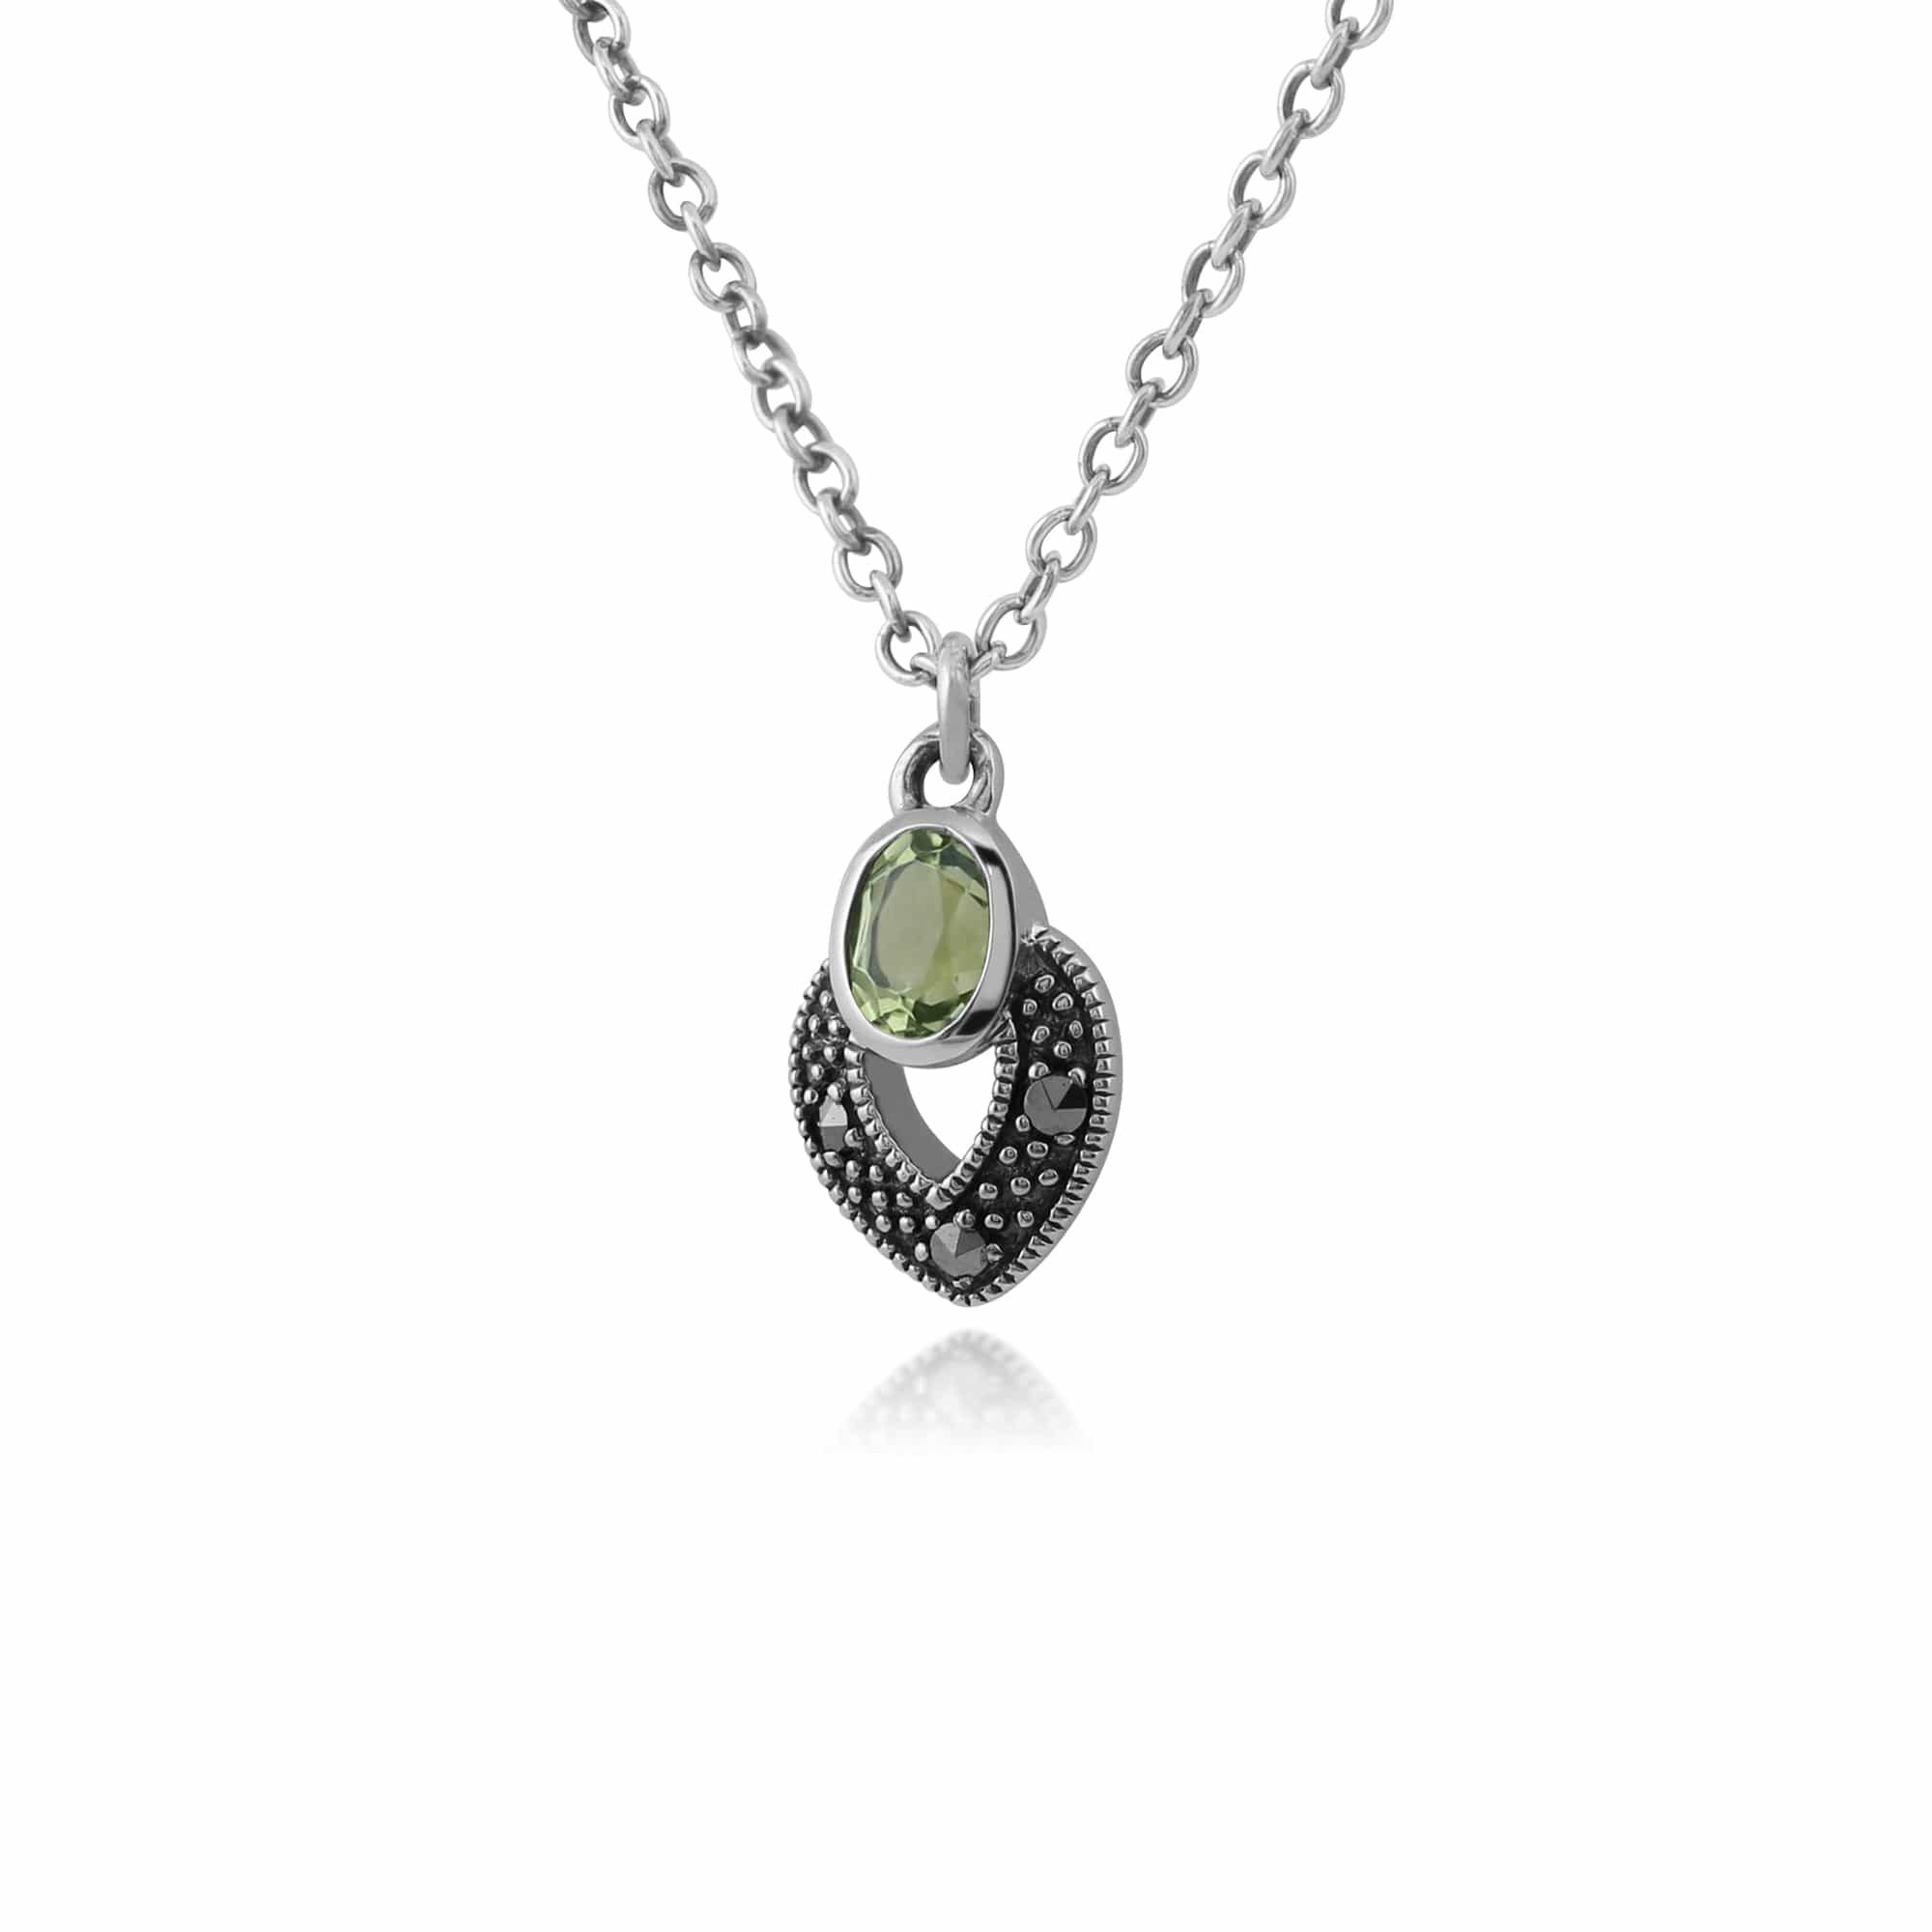 214N688206925 Art Deco Style Oval Peridot & Marcasite Necklace in Sterling Silver 2